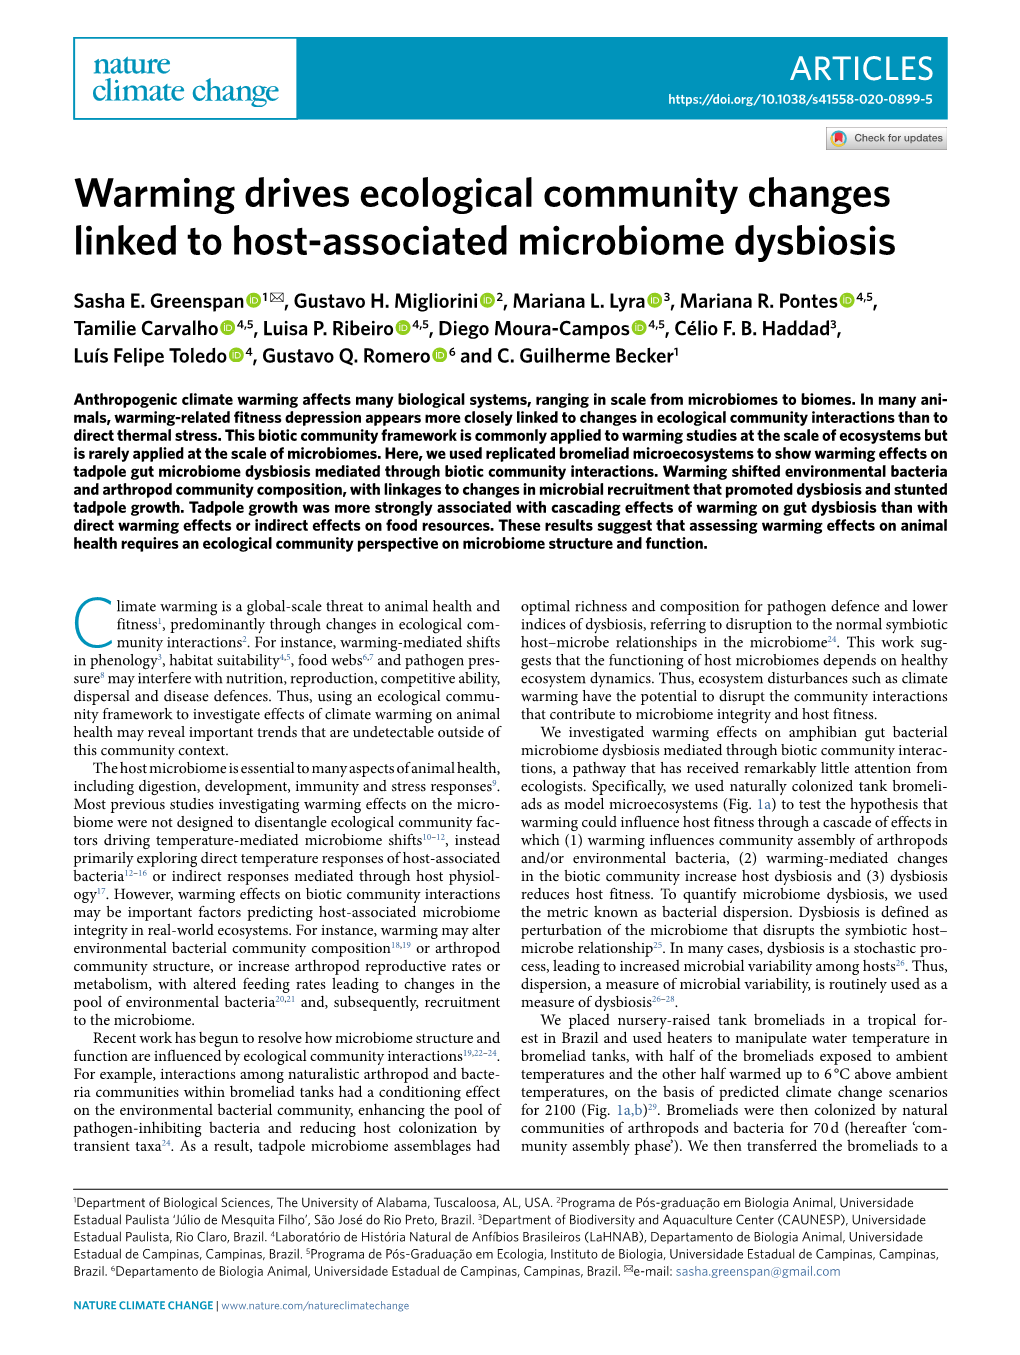 Warming Drives Ecological Community Changes Linked to Host-Associated Microbiome Dysbiosis